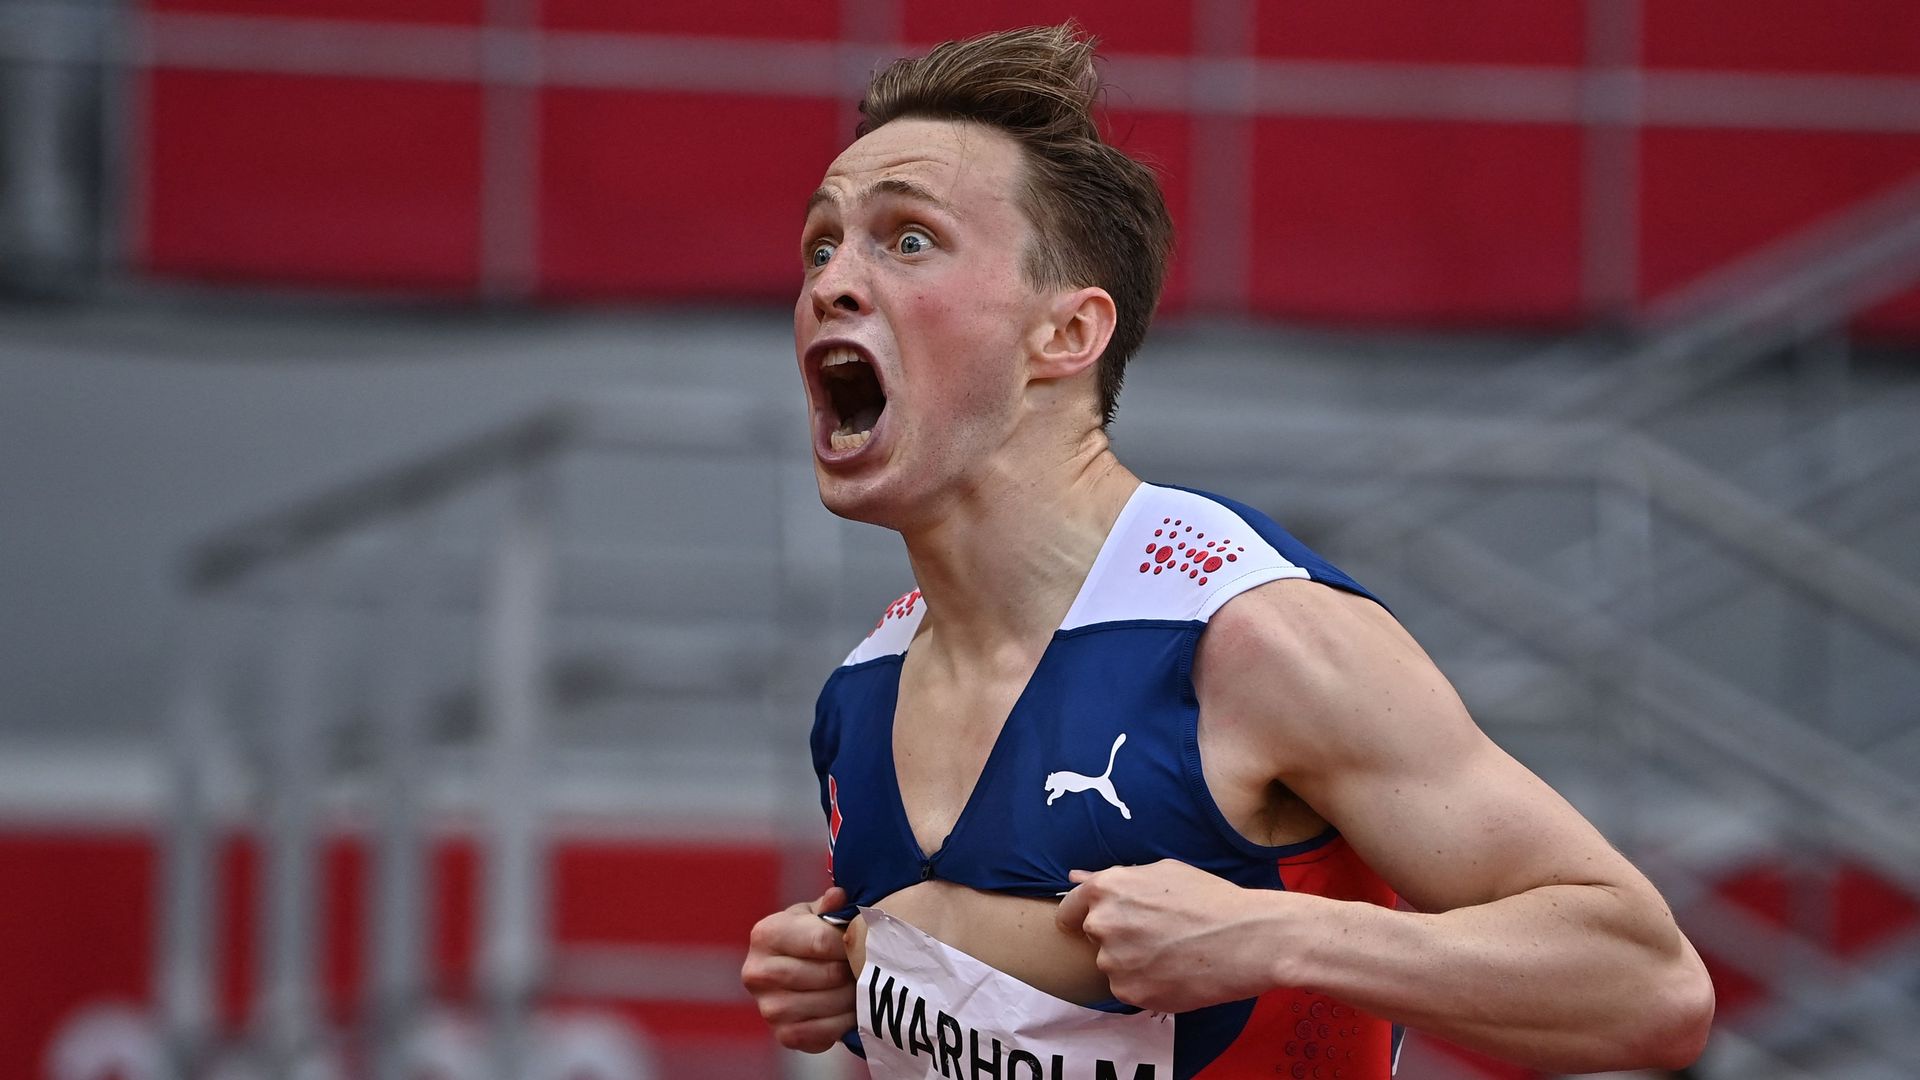 Norway's Karsten Warholm celebrates as he crosses the finish line to win the men's 400m hurdles final during the Tokyo 2020 Olympic Games at the Olympic Stadium in Tokyo on August 3